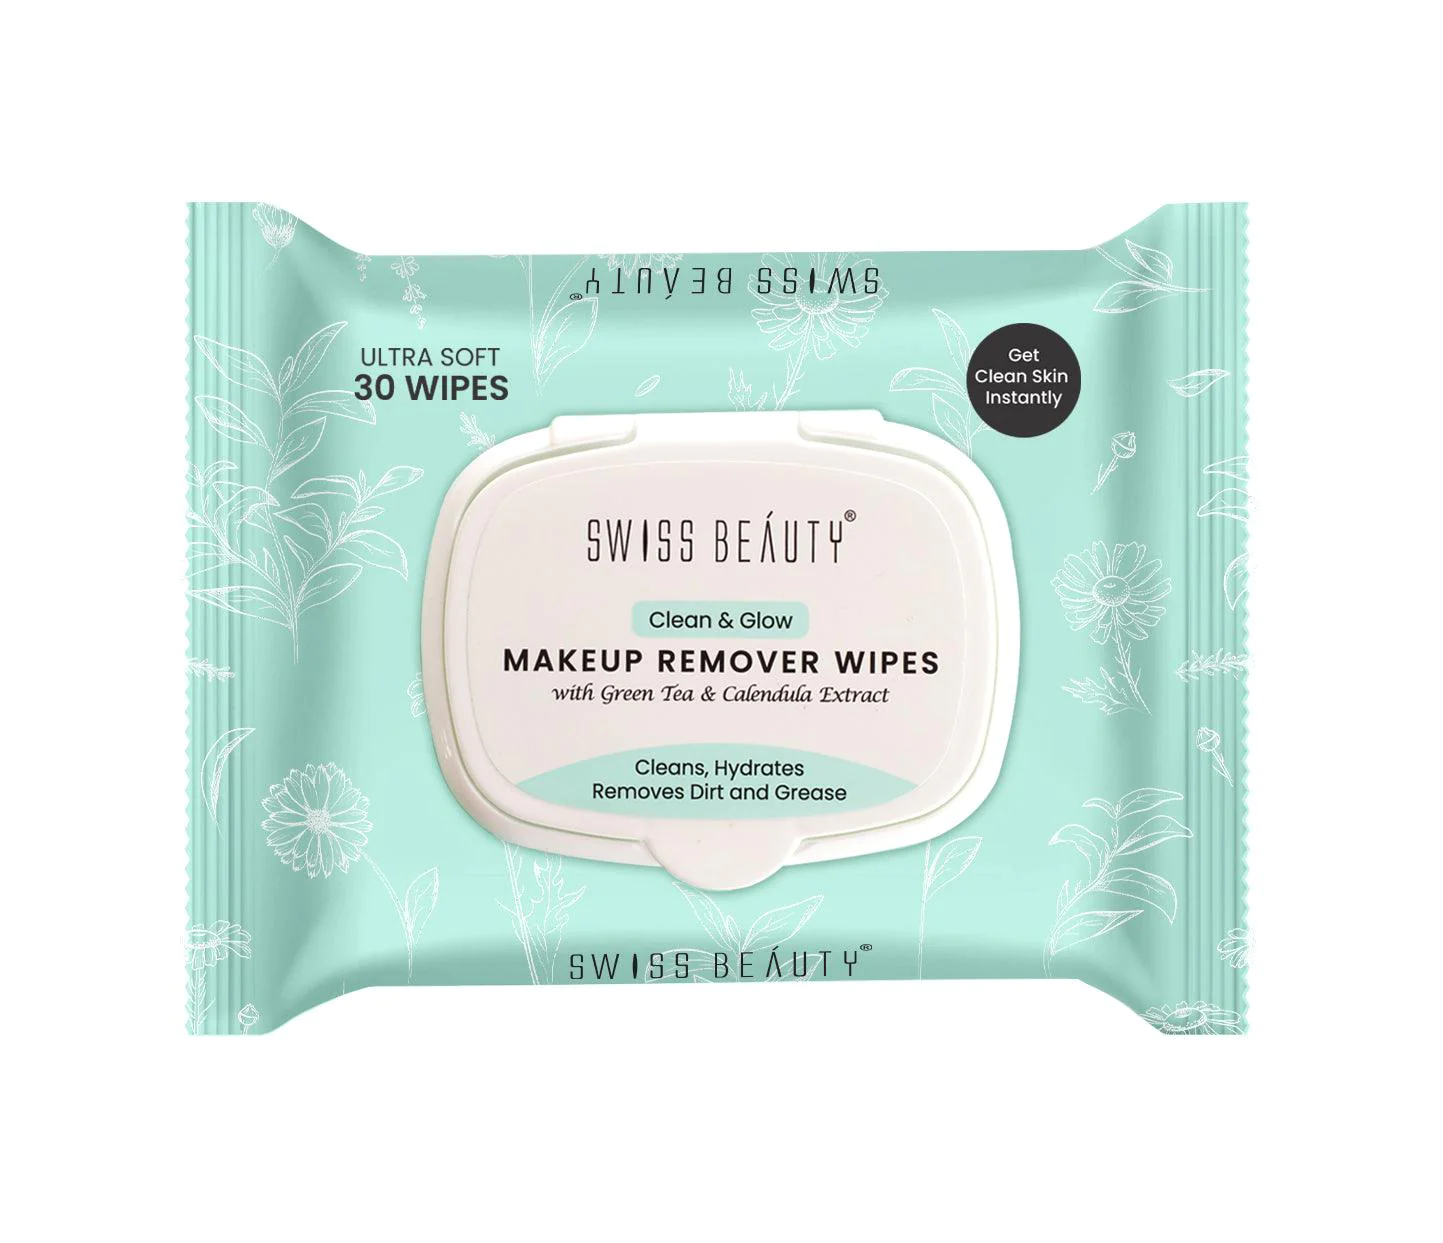 Swiss beauty make up remover wipes